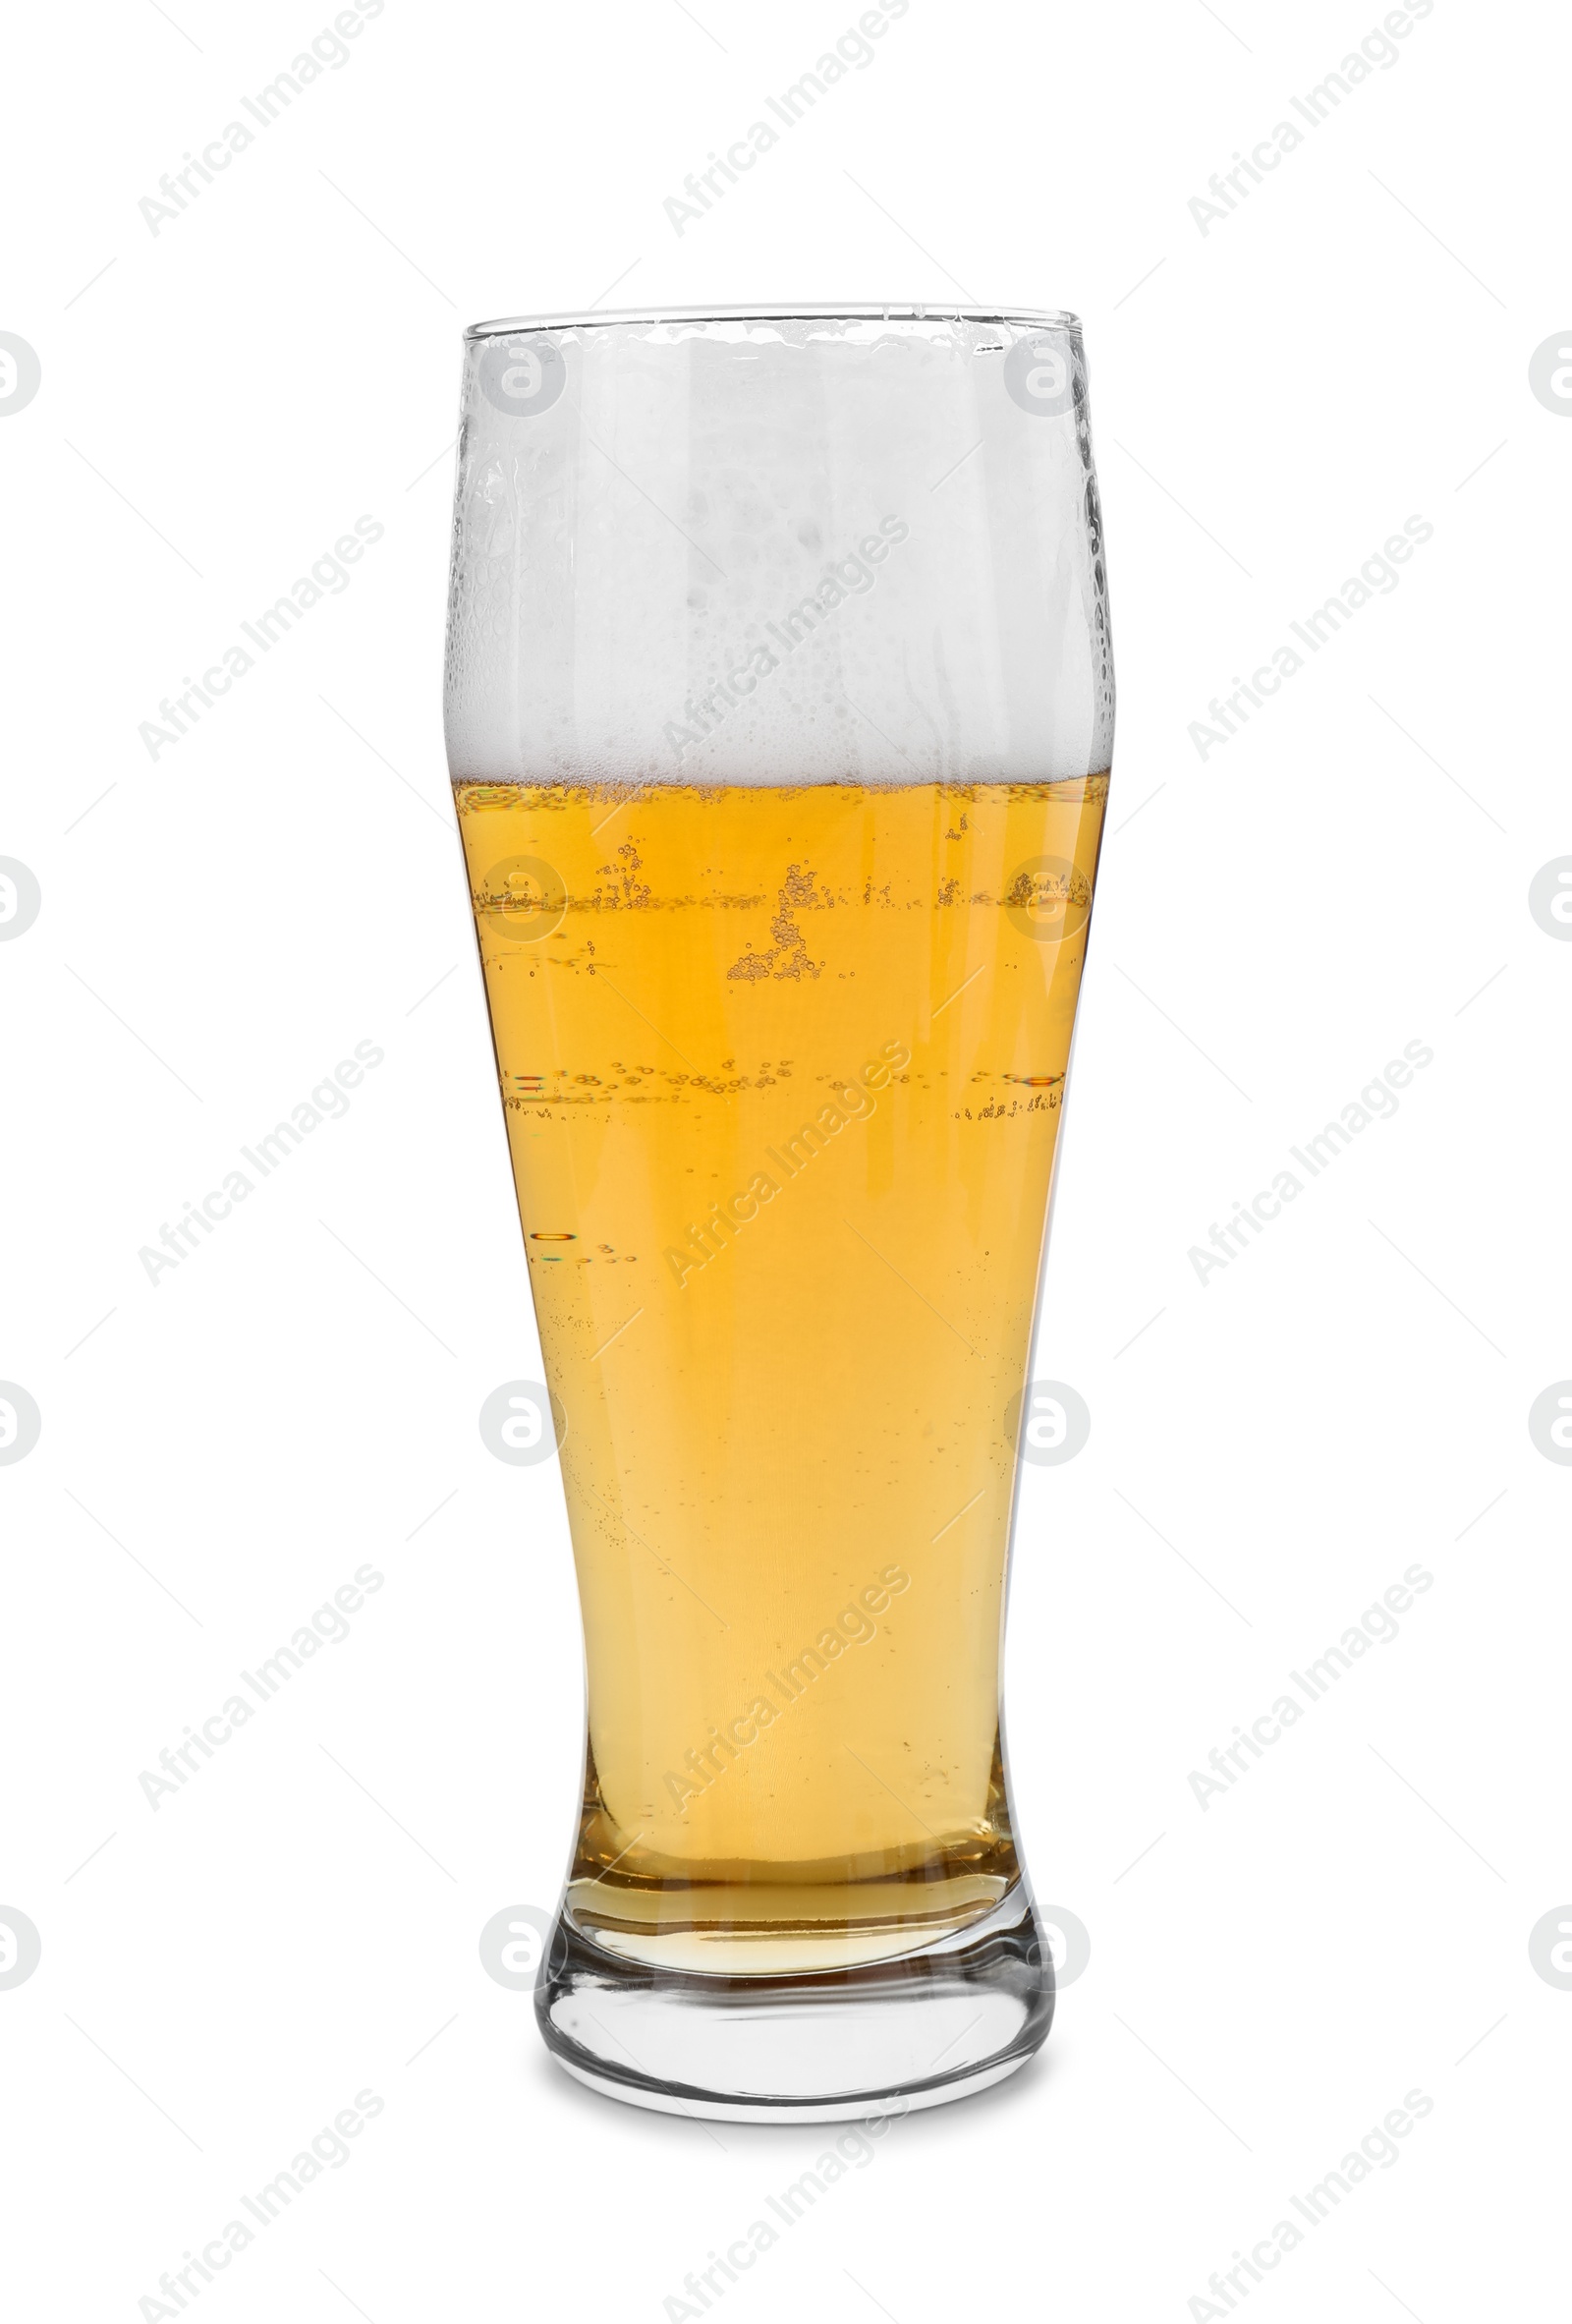 Photo of Full glass of beer isolated on white